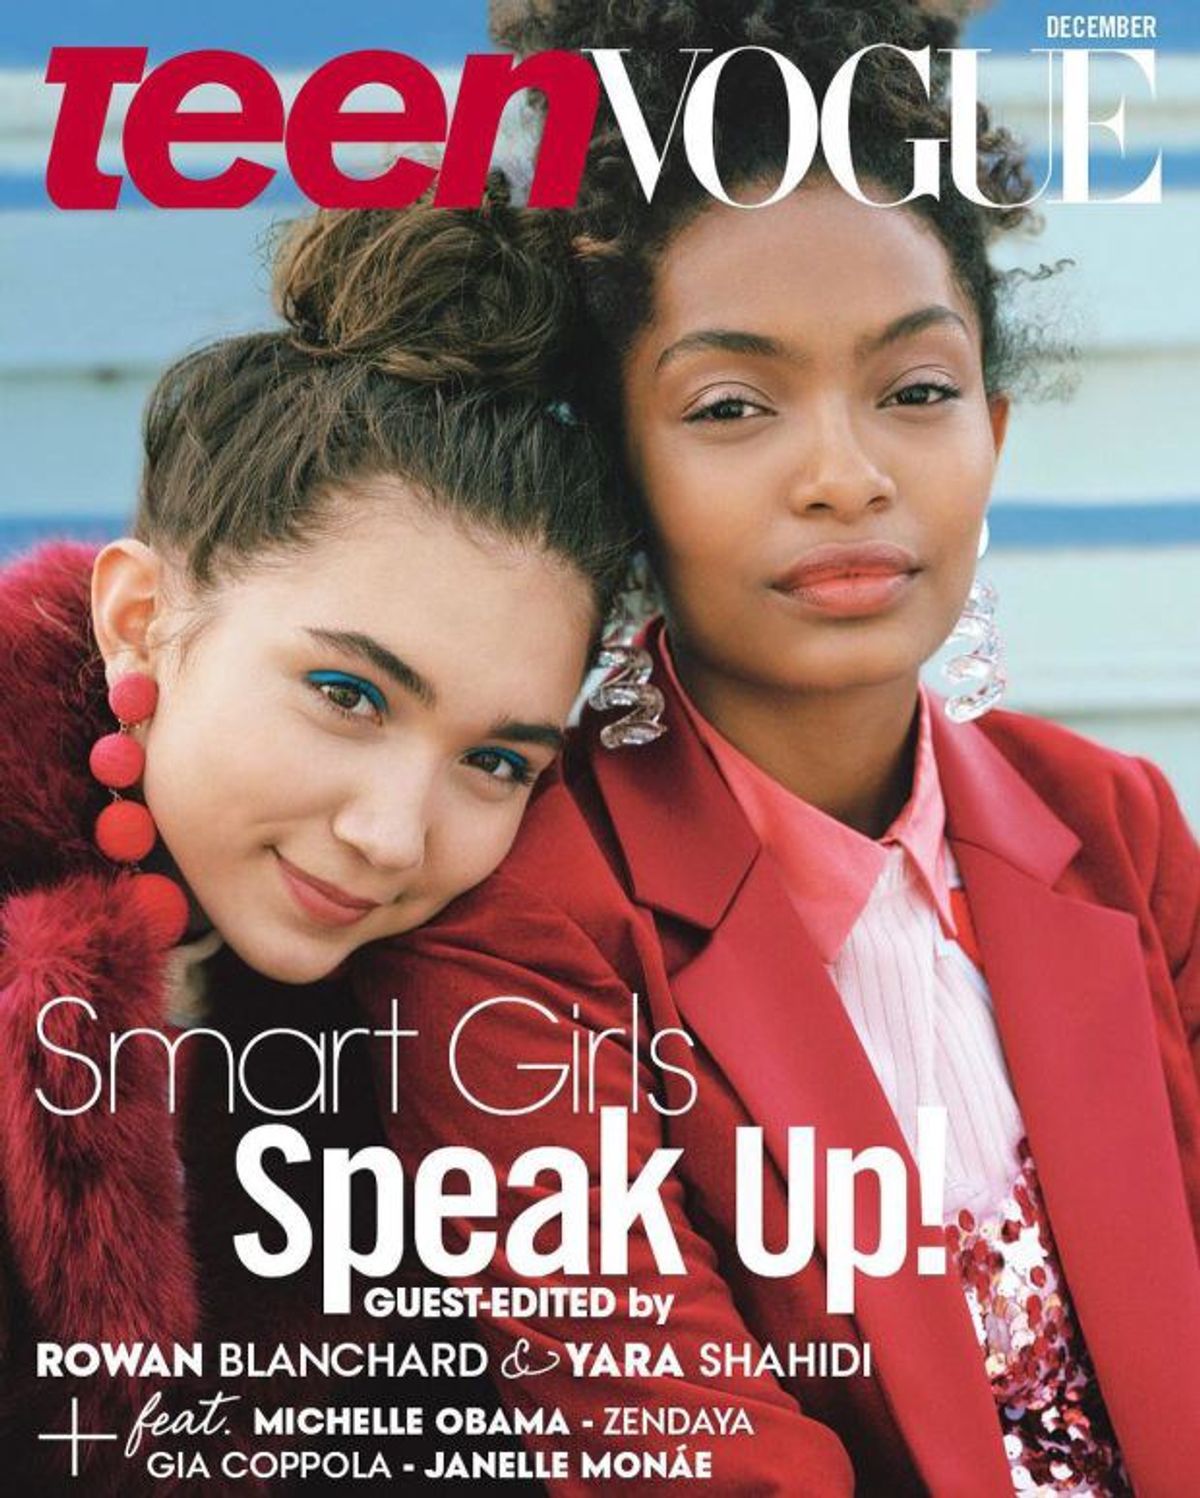 Teen Vogue Went Rogue (And Why We Shouldn't Be Surprised)